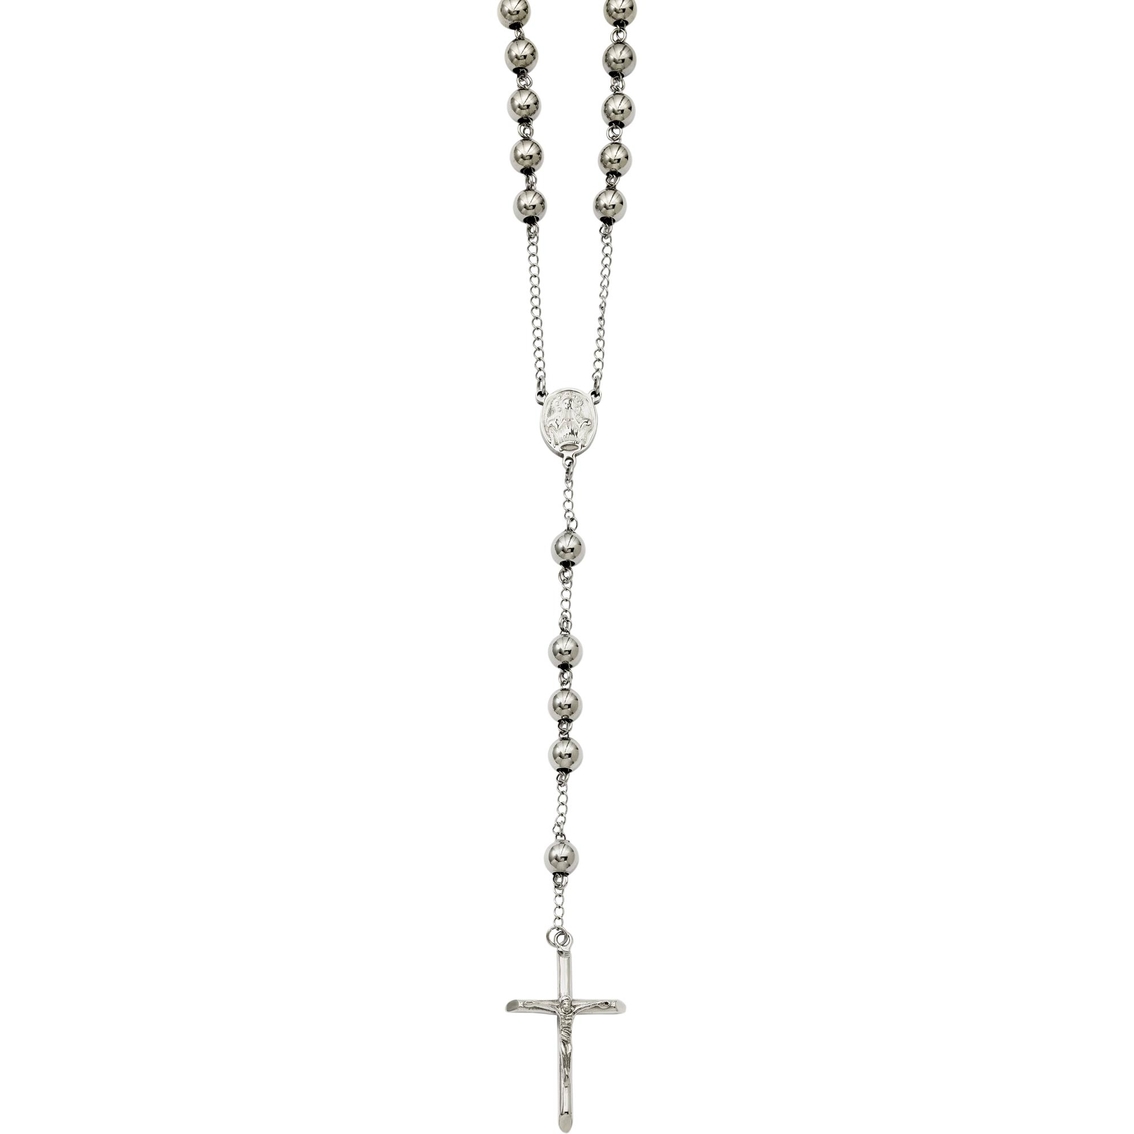 Stainless Steel 8mm Bead Rosary Necklace | Men's Chains & Pendants ...